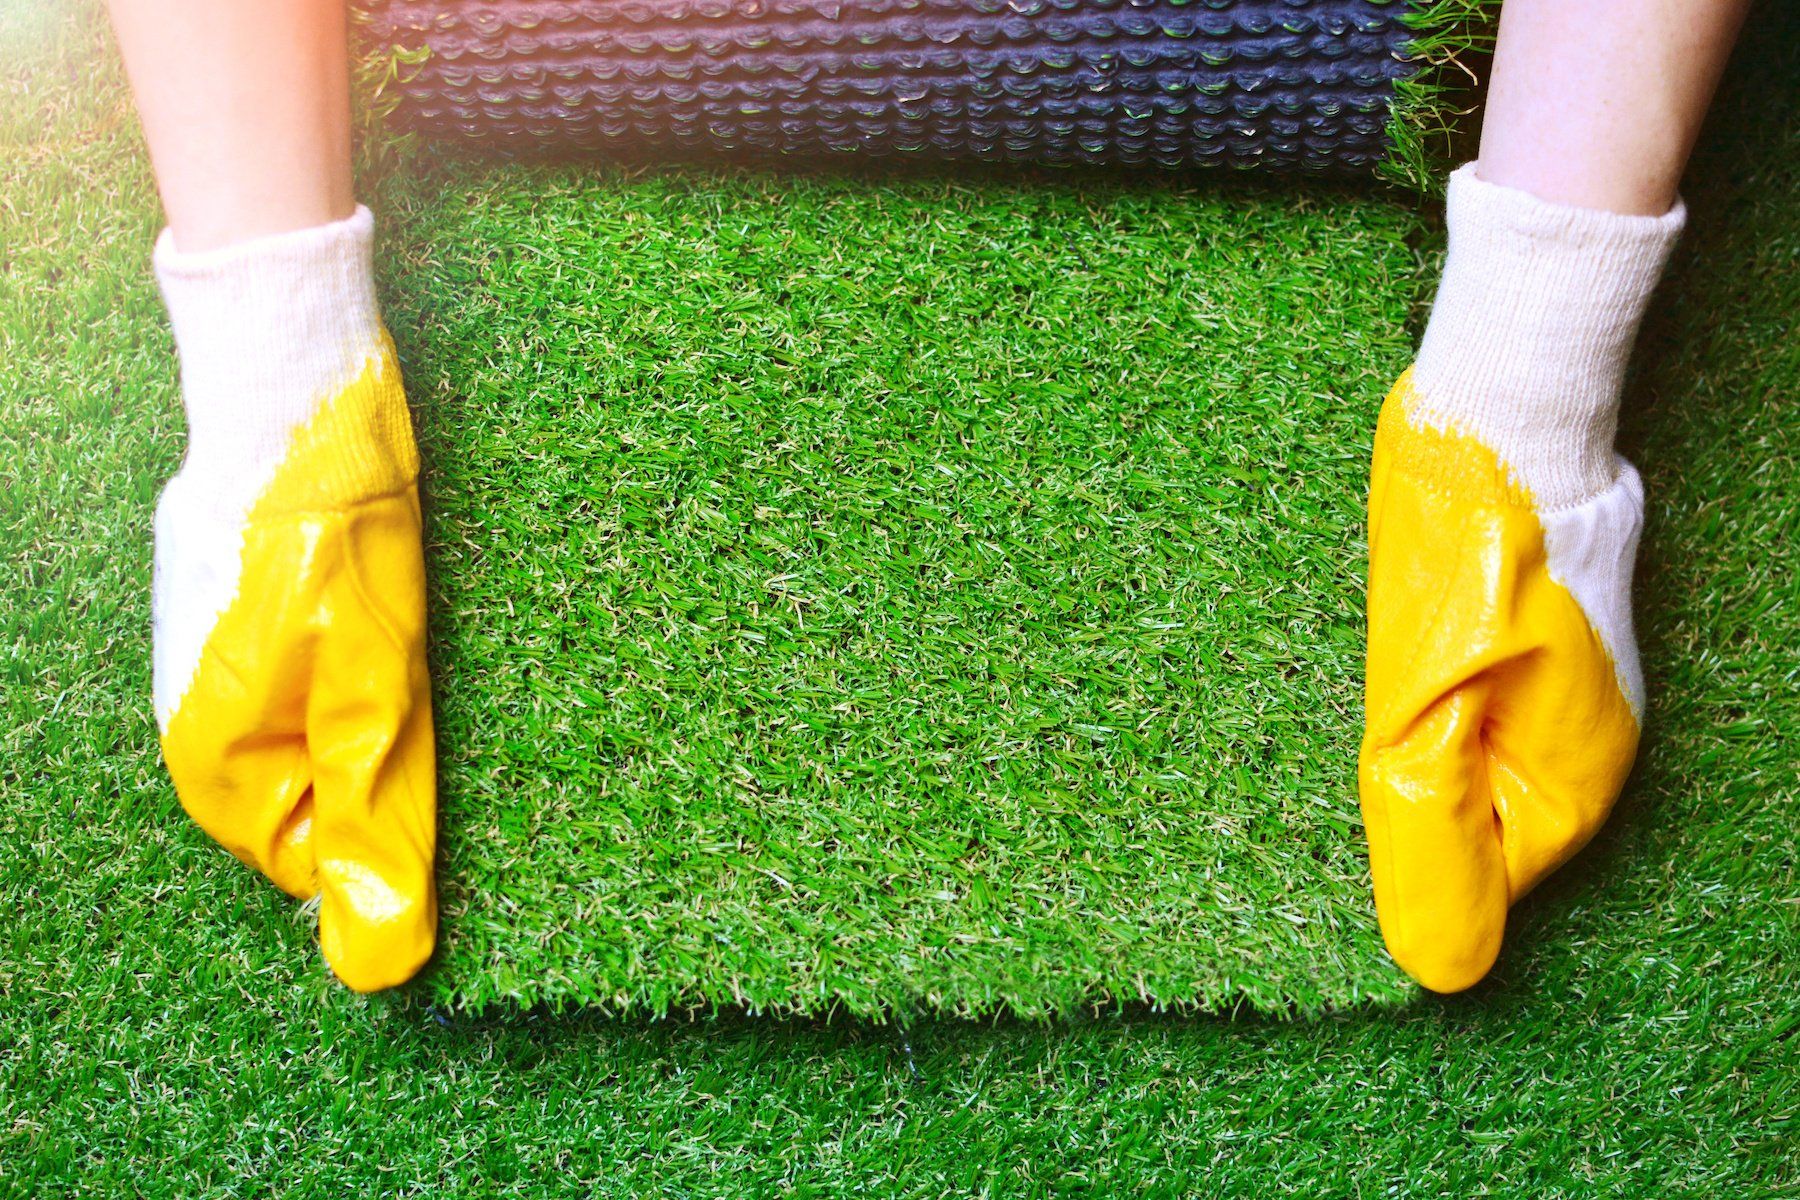 Hand wearing gloves carefully holding a piece of artificial turf against a lush green synthetic grass backdrop.